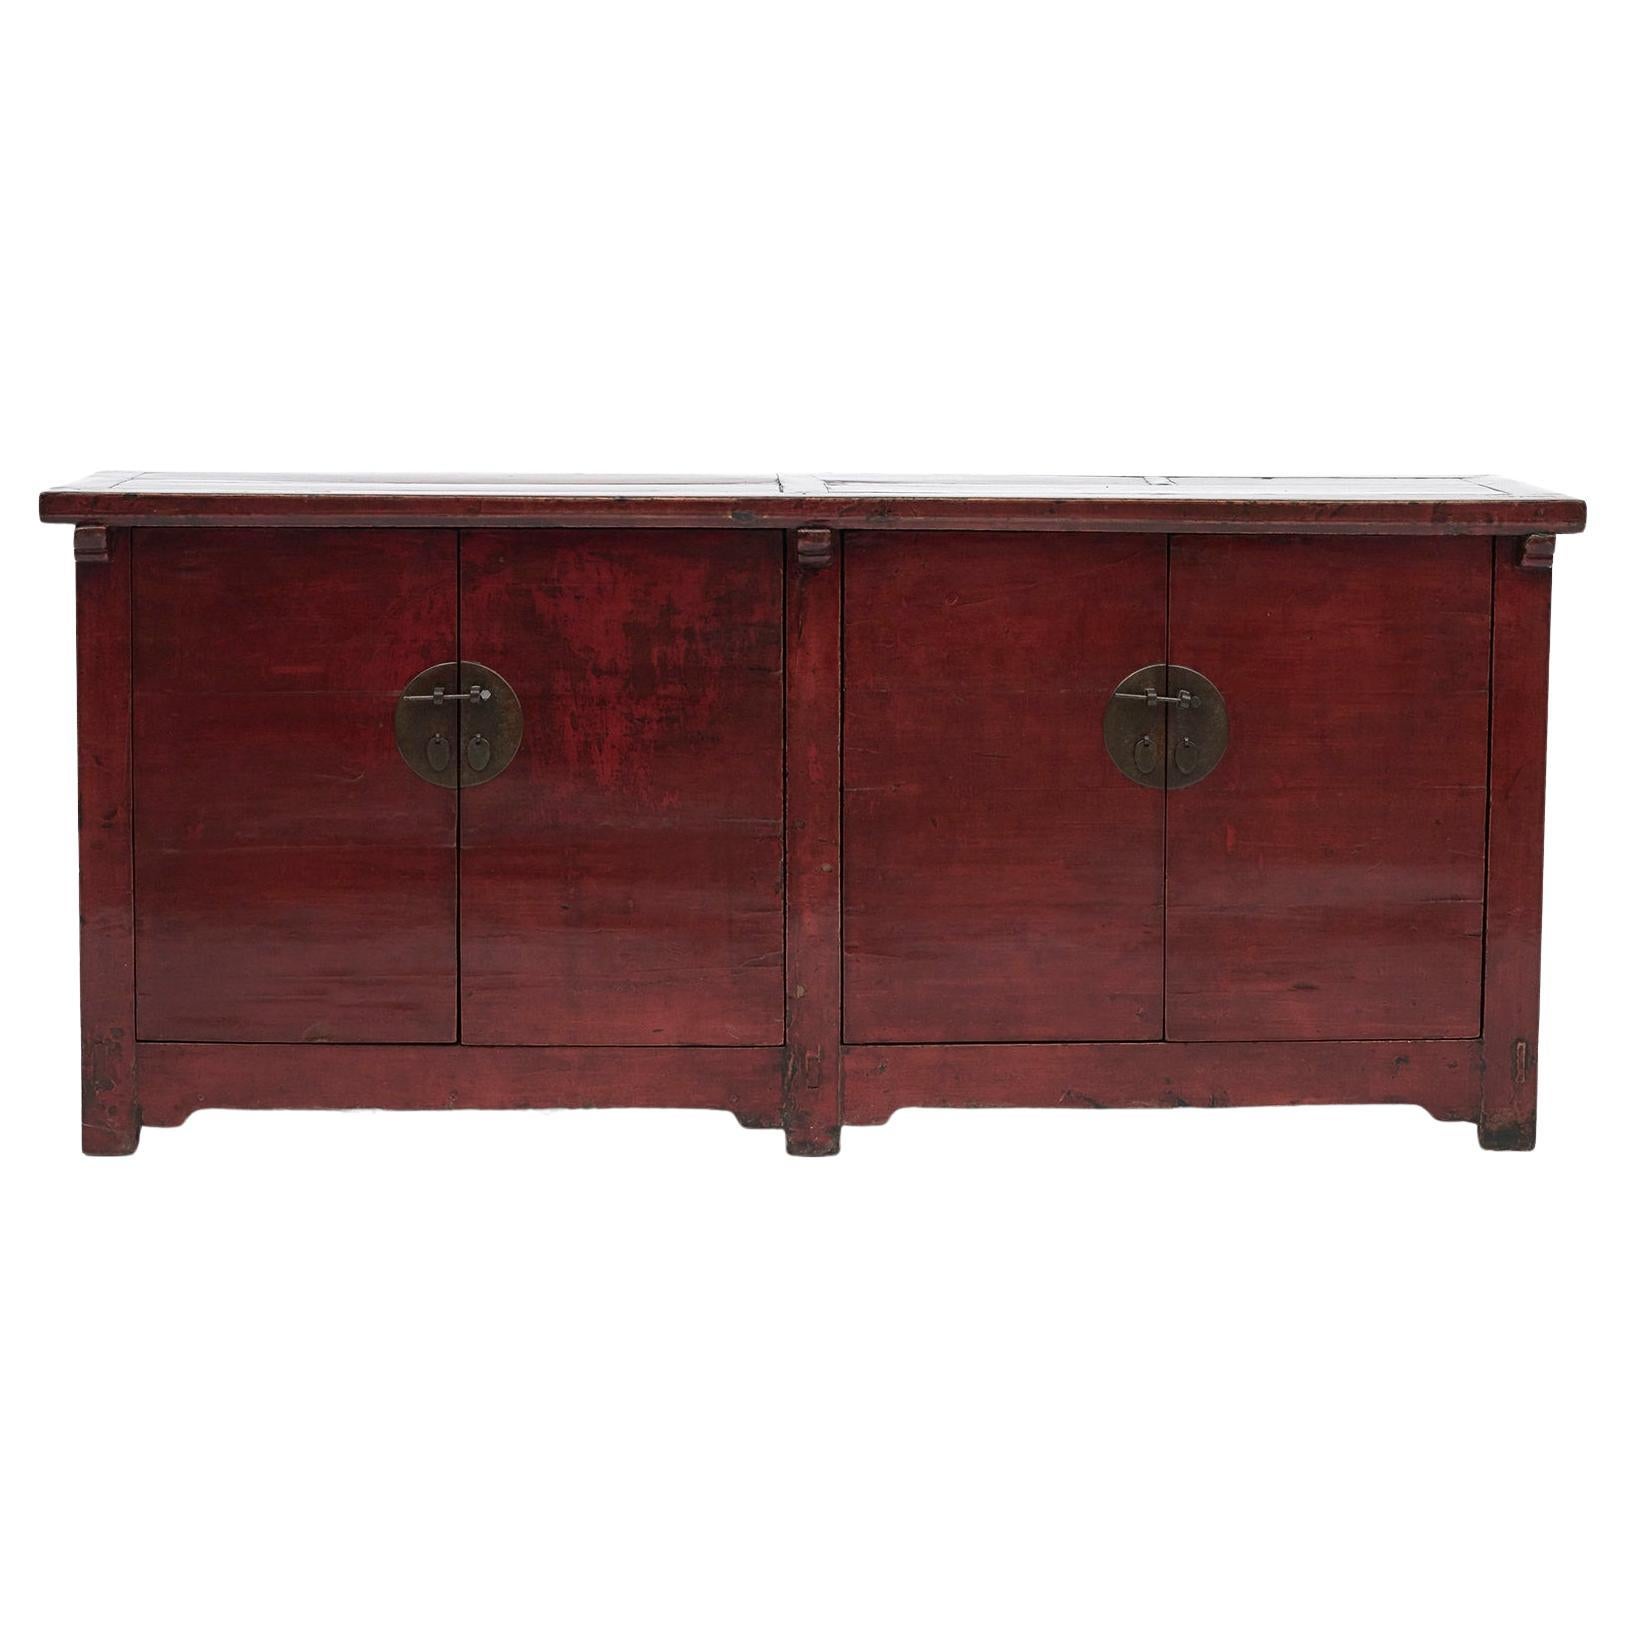 Red Lacquered Sideboard, Shanxi Province